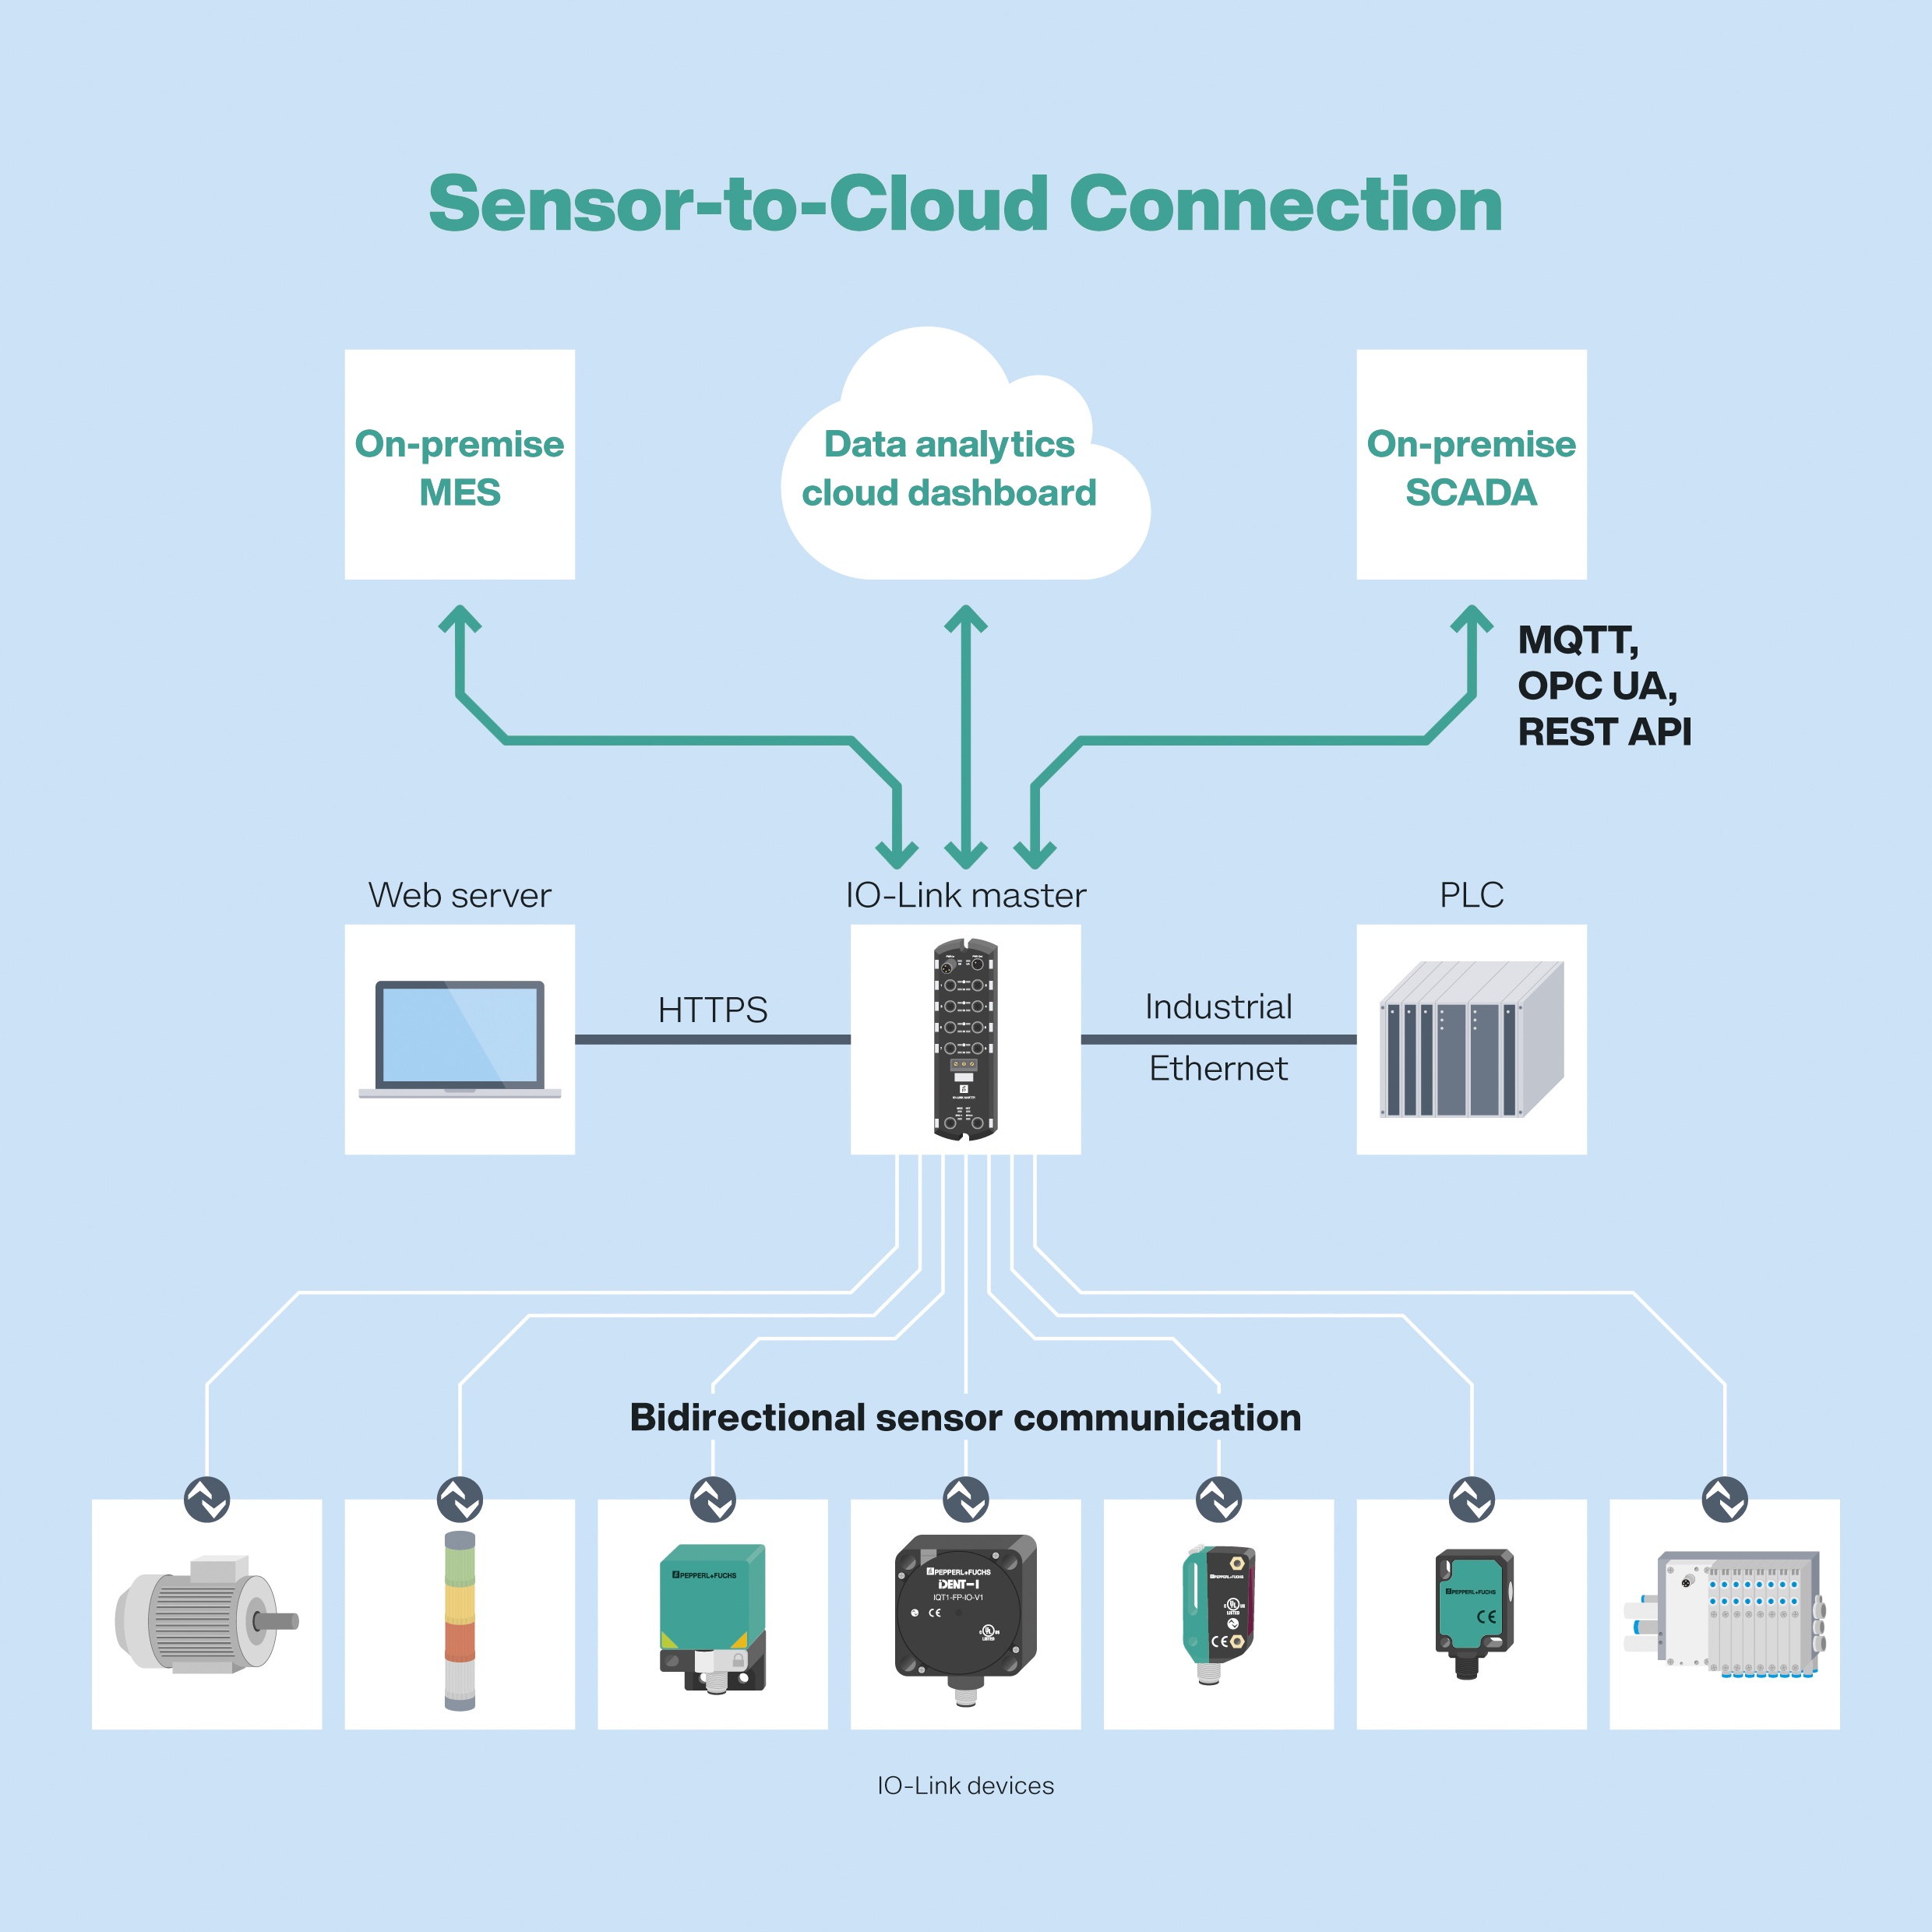 Diagram from Pepperl+Fuchs showing IIot sensor-to-cloud connections.